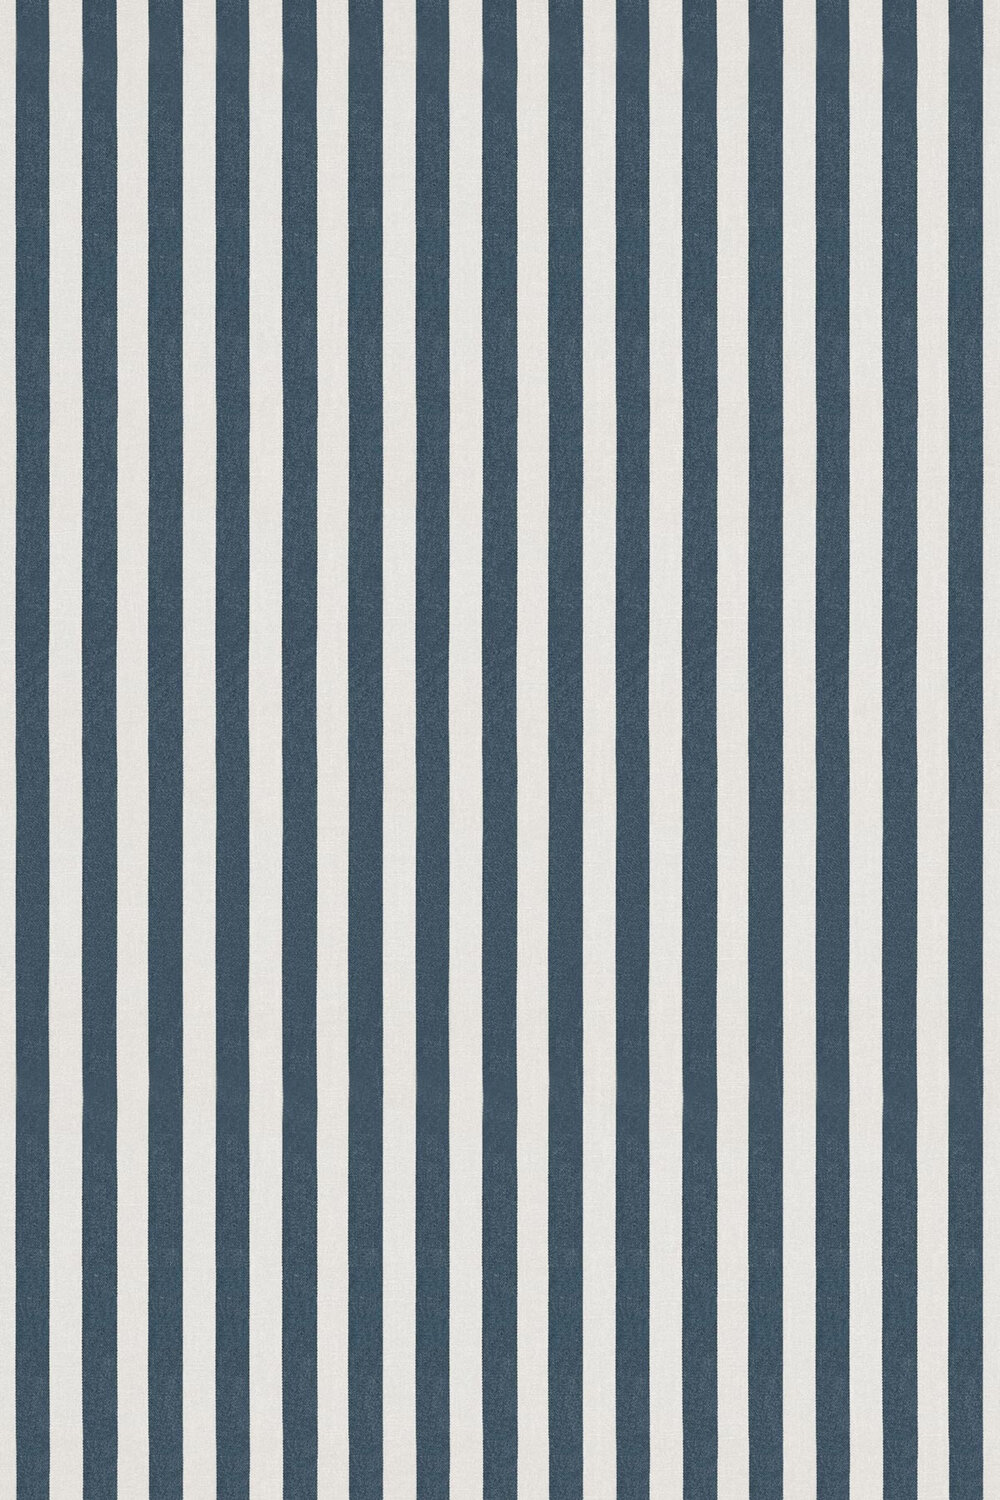 Carnival Stripe Fabric - Navy - by Harlequin